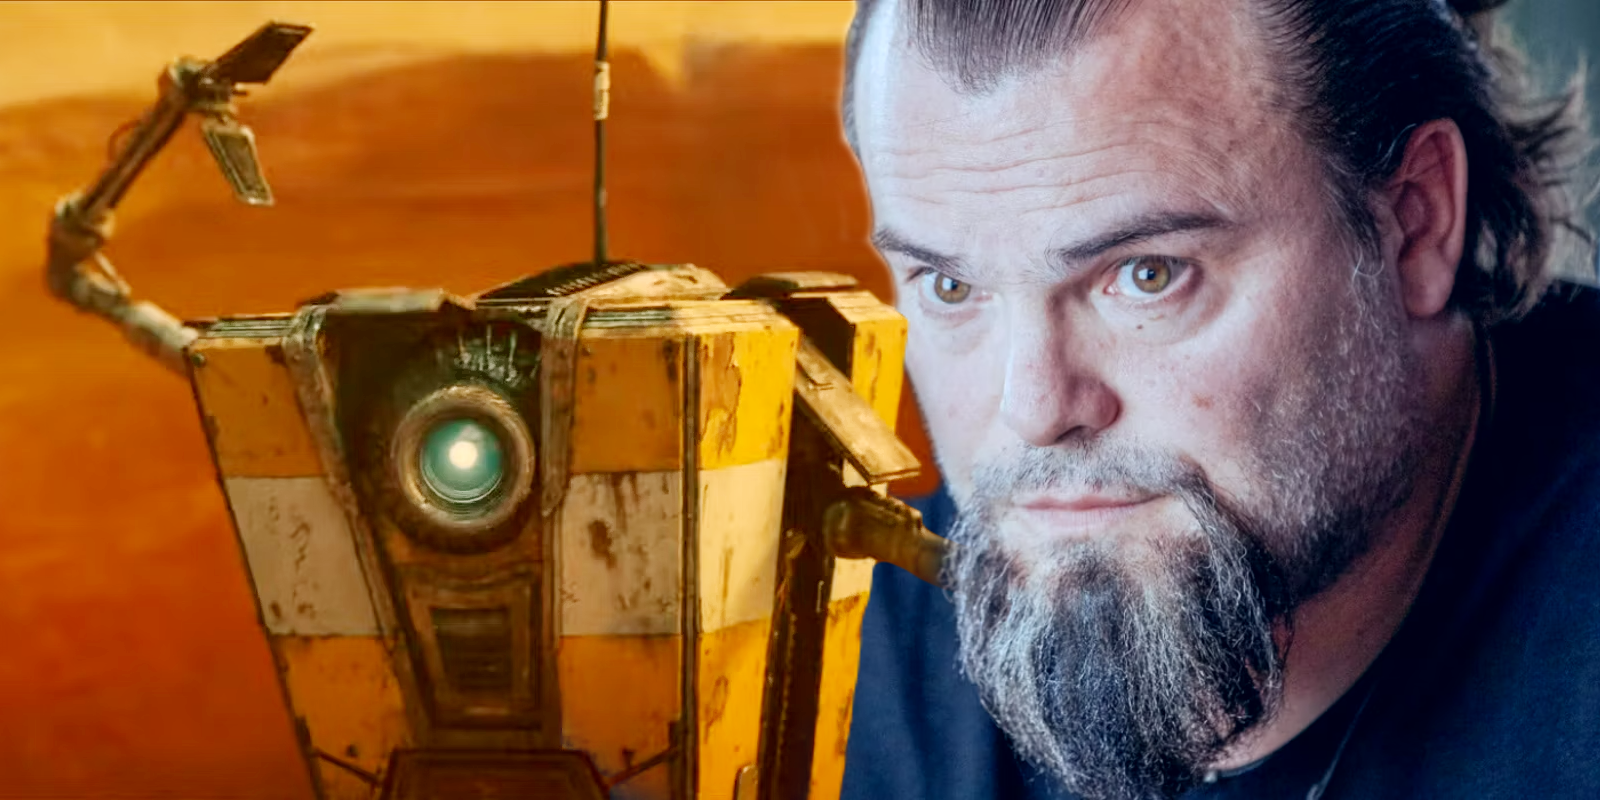 Claptrap in the Borderlands movie next to Jack Black in Documentary Now!